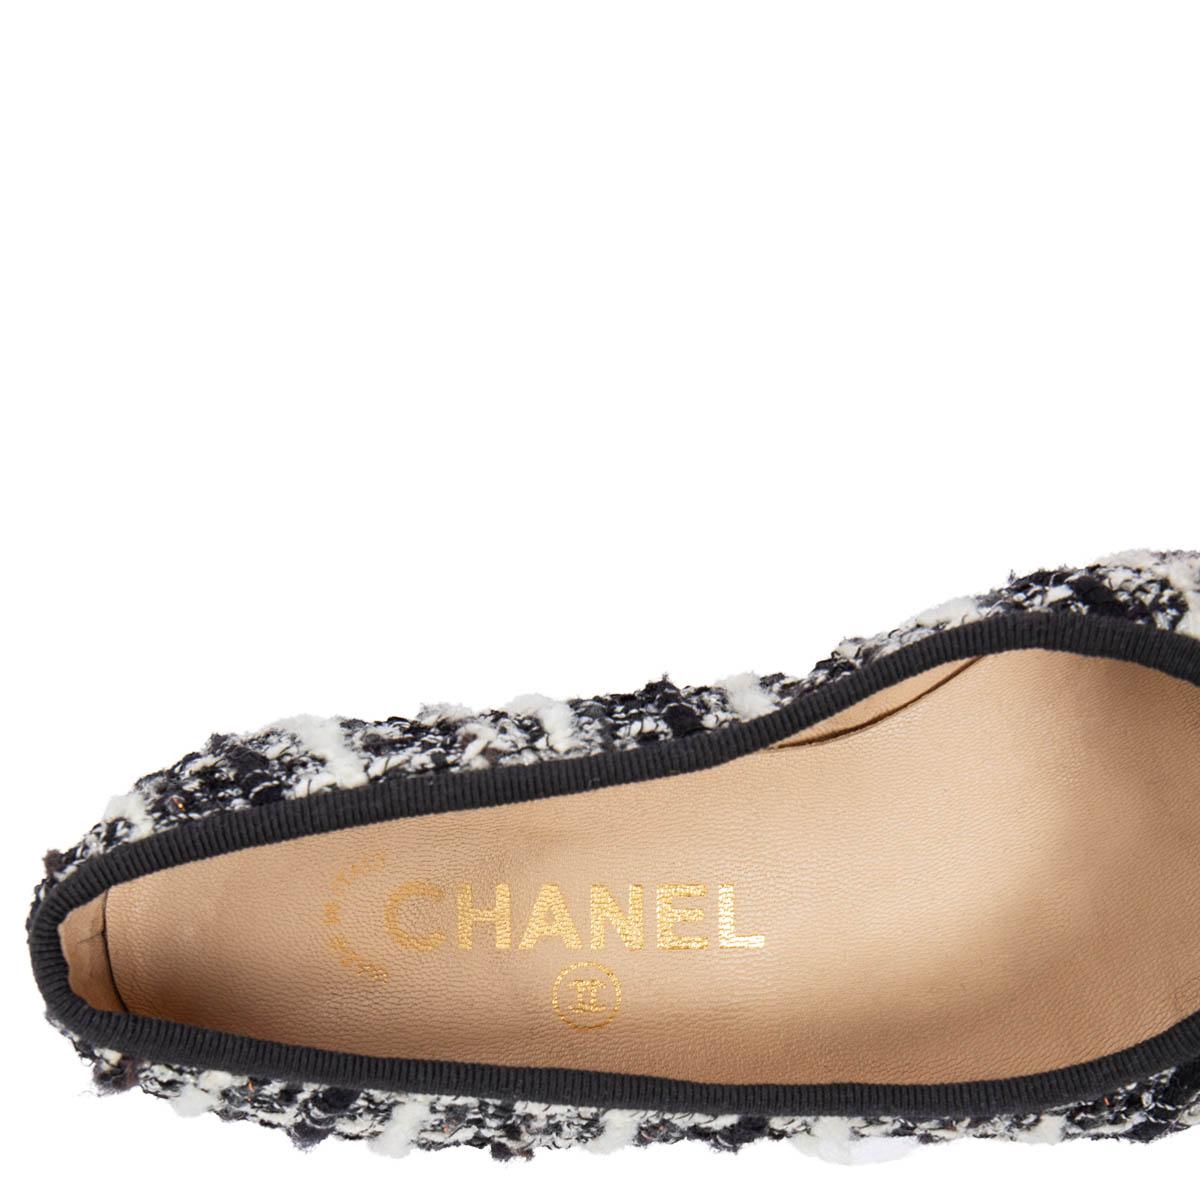 Women's CHANEL black & white TWEED Ballet Flats Shoes 36 For Sale